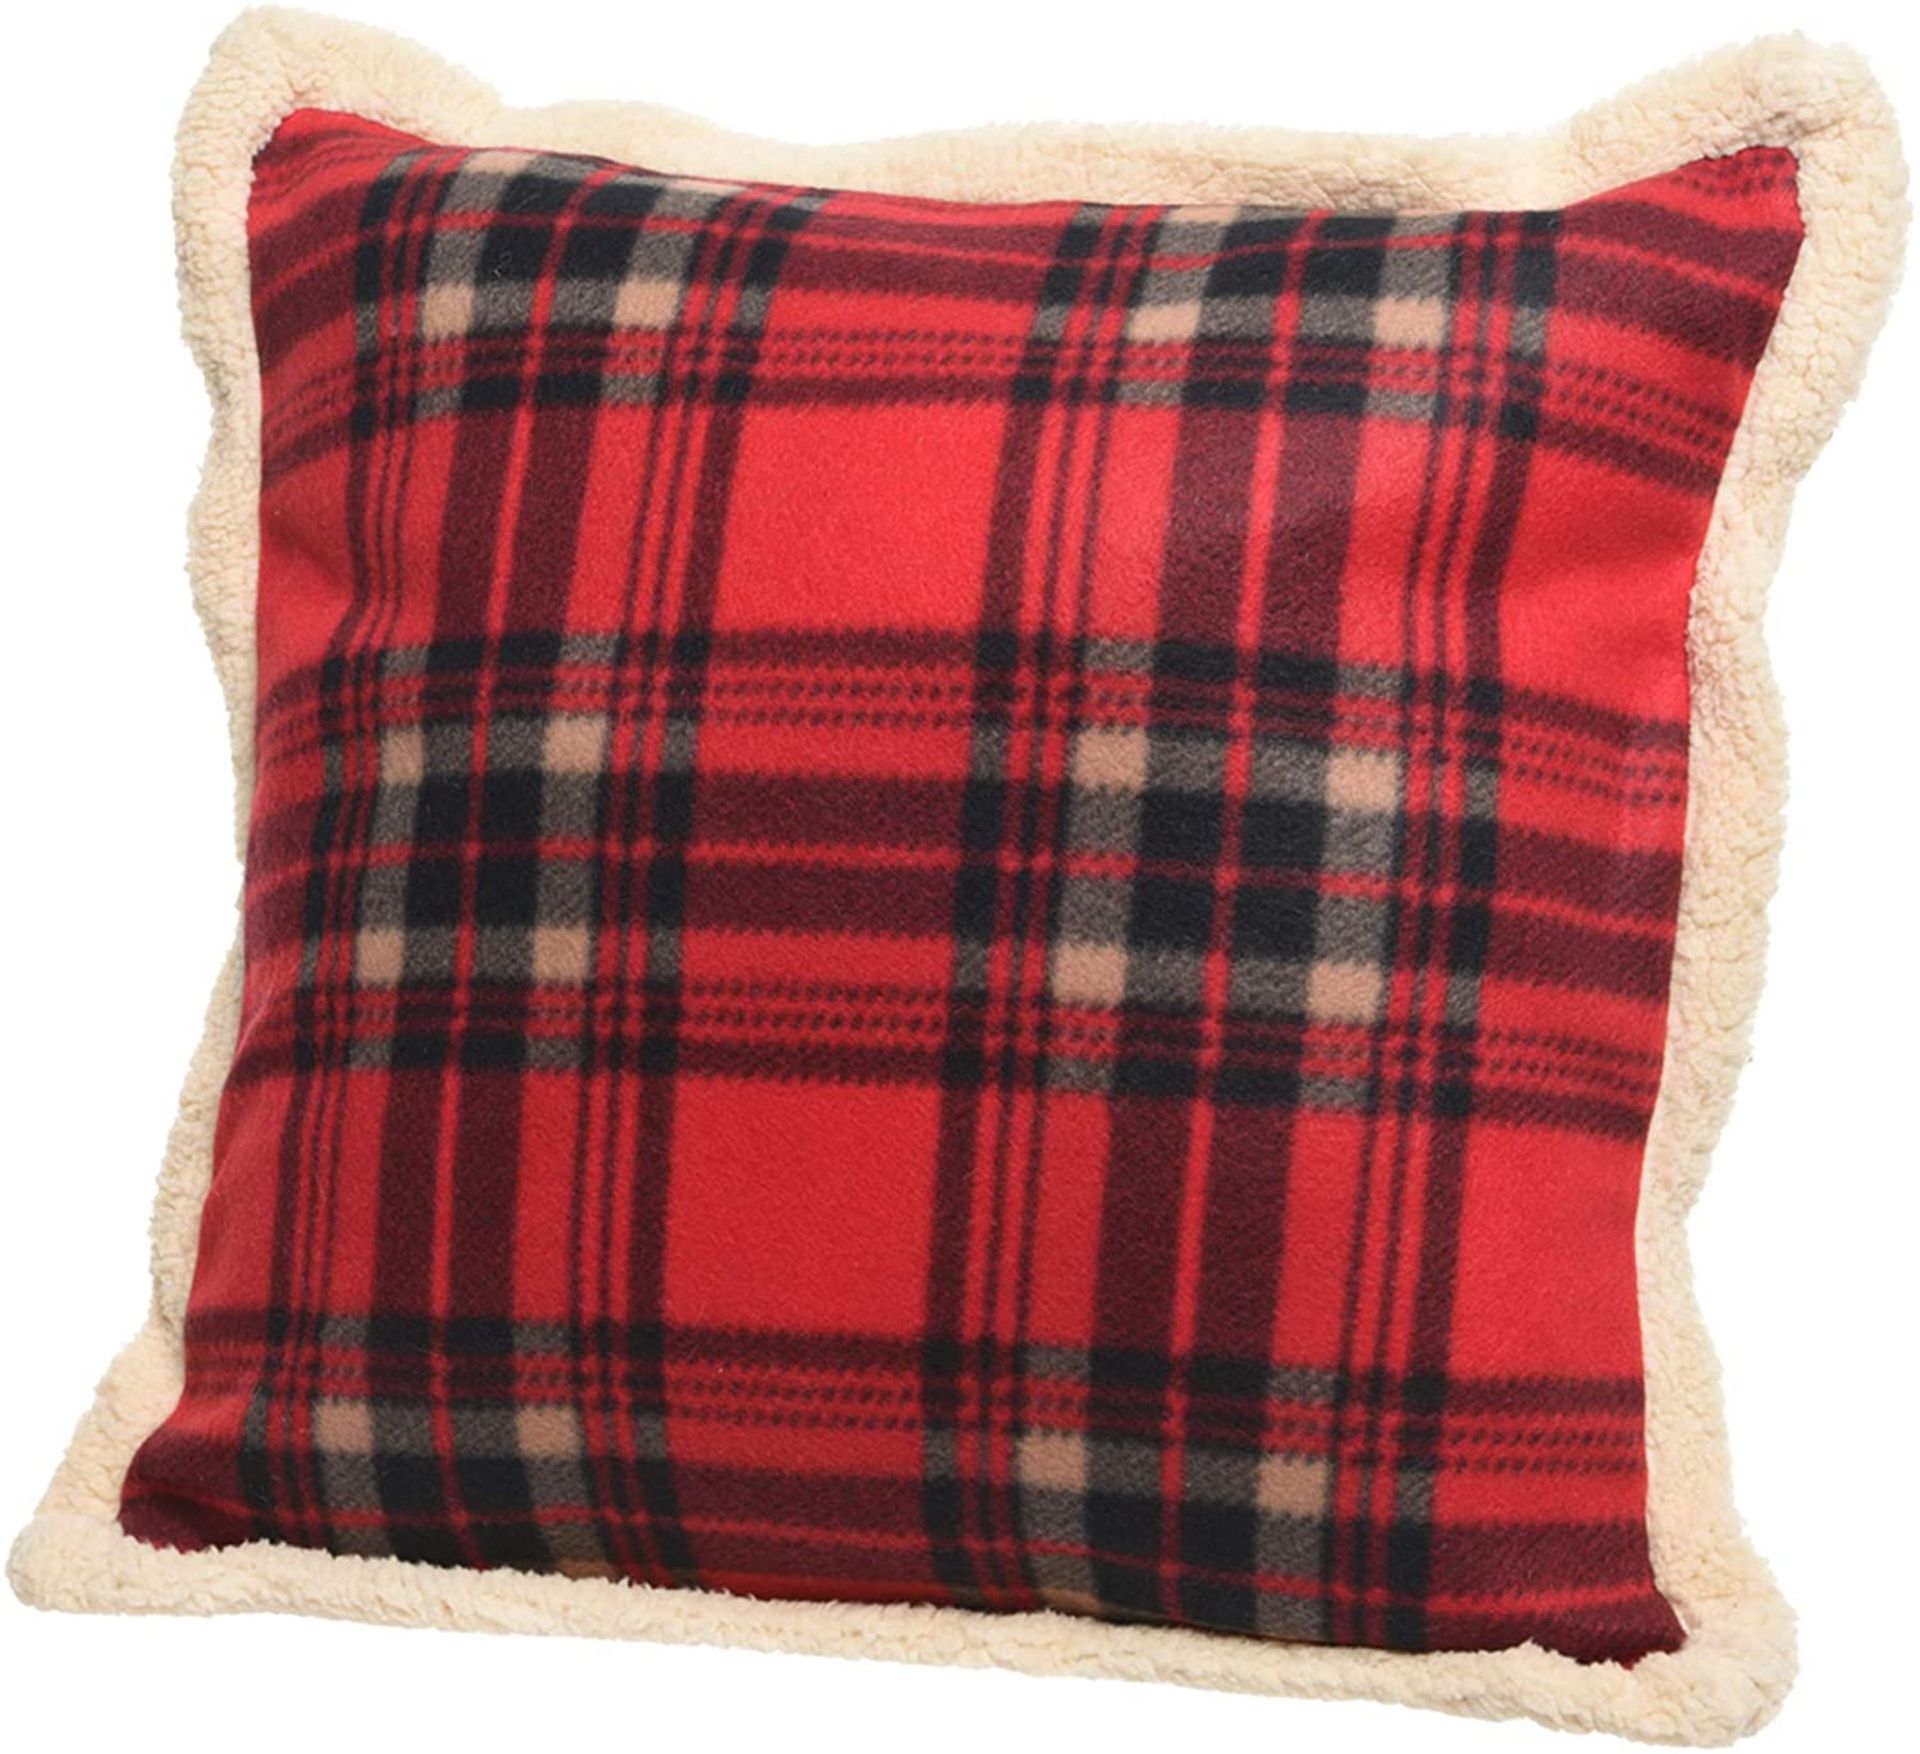 6 x Soft Touch Red Tartan Cushions with Fleecy Trim - Image 5 of 7